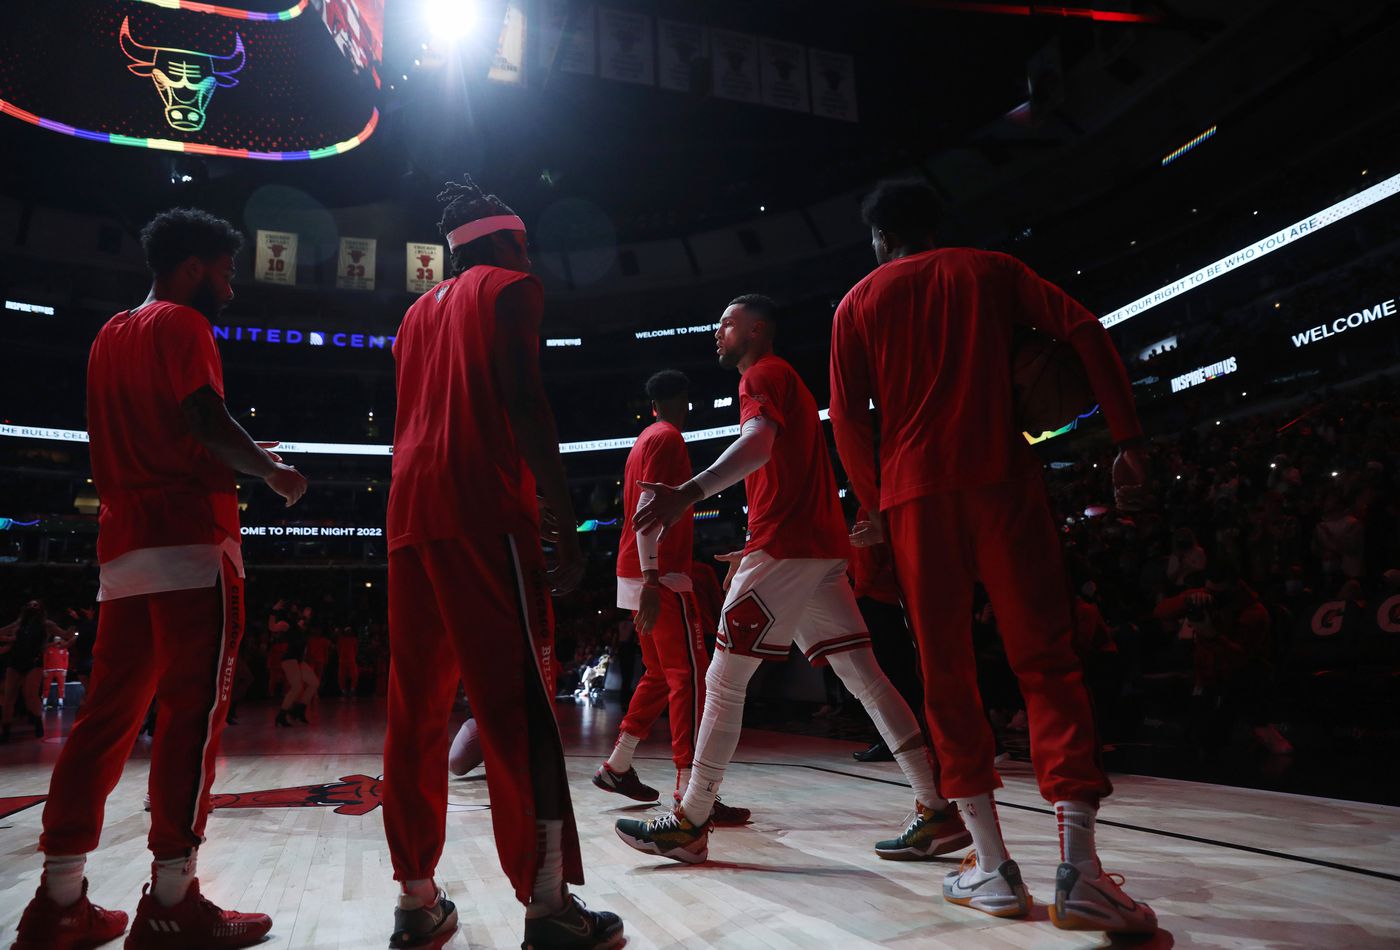 Chicago Bulls guard Zach LaVine (8), center right, is introduced for a game against the Washington Wizards at United Center on Jan. 7, 2022, in Chicago.